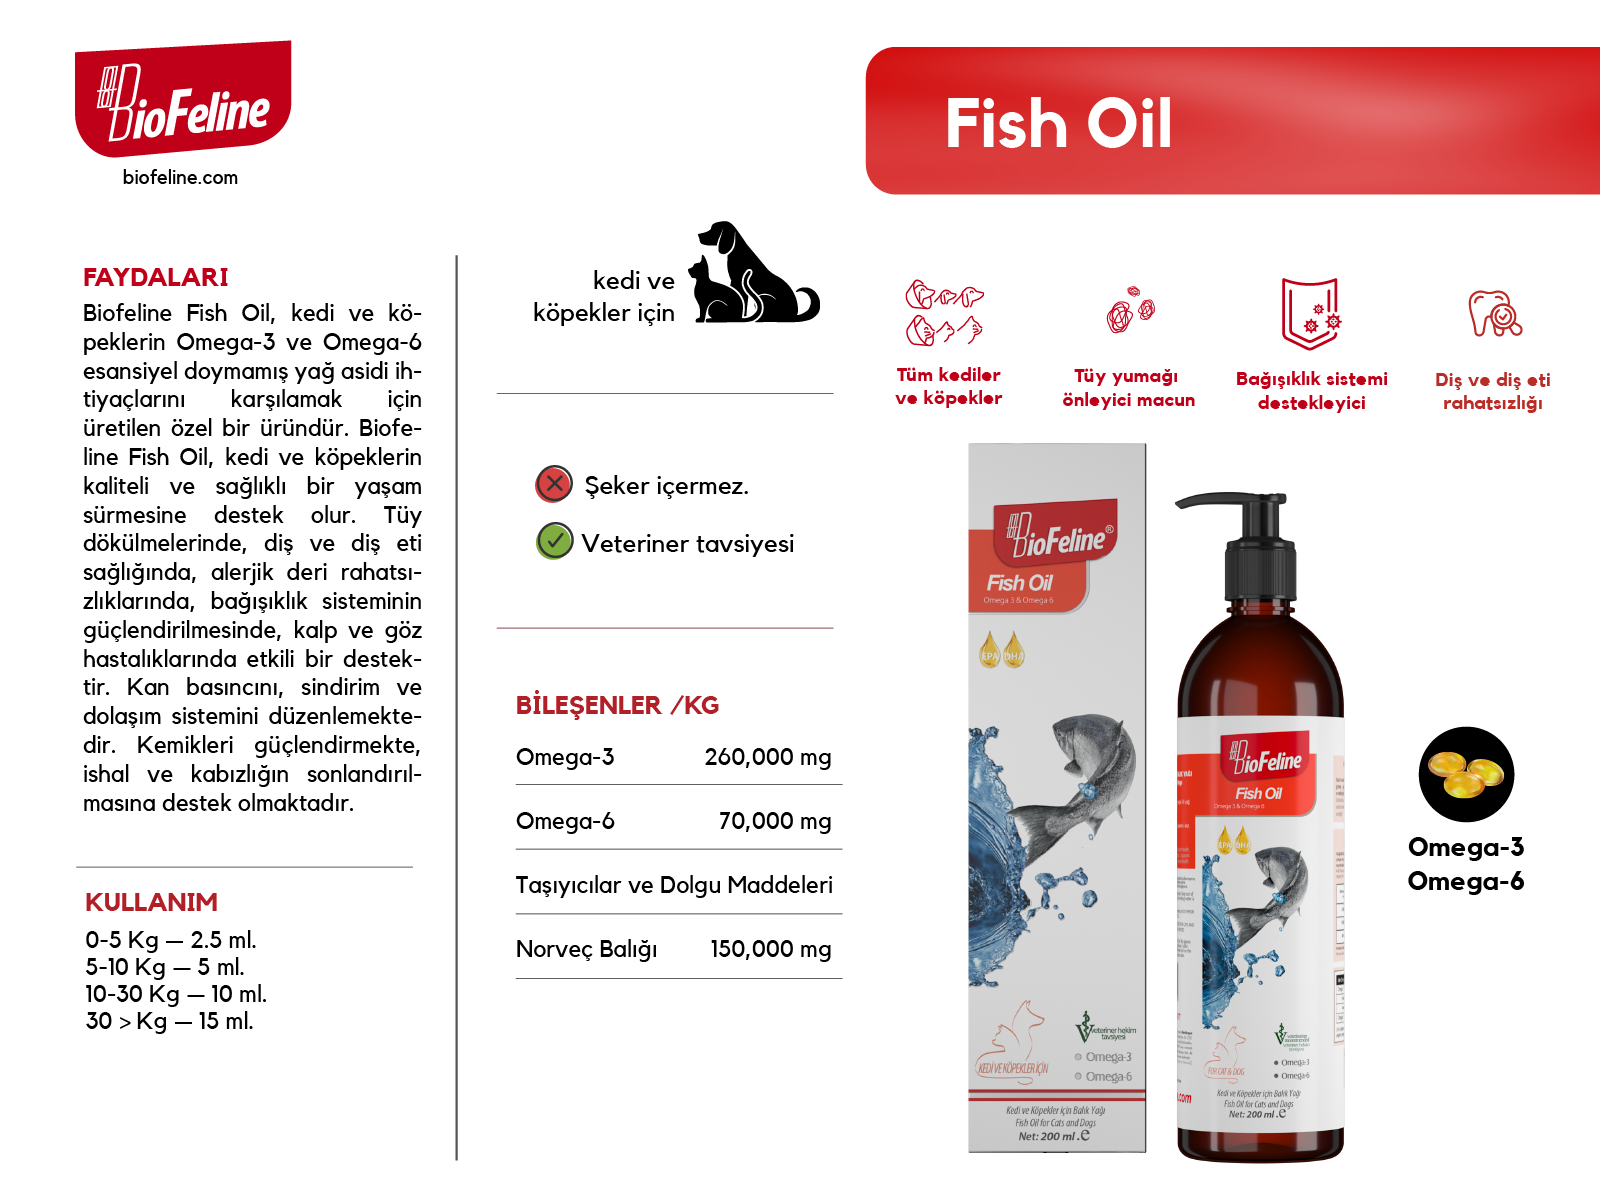 Fish Oil 200ml & Plus+B For Dogs 50ml